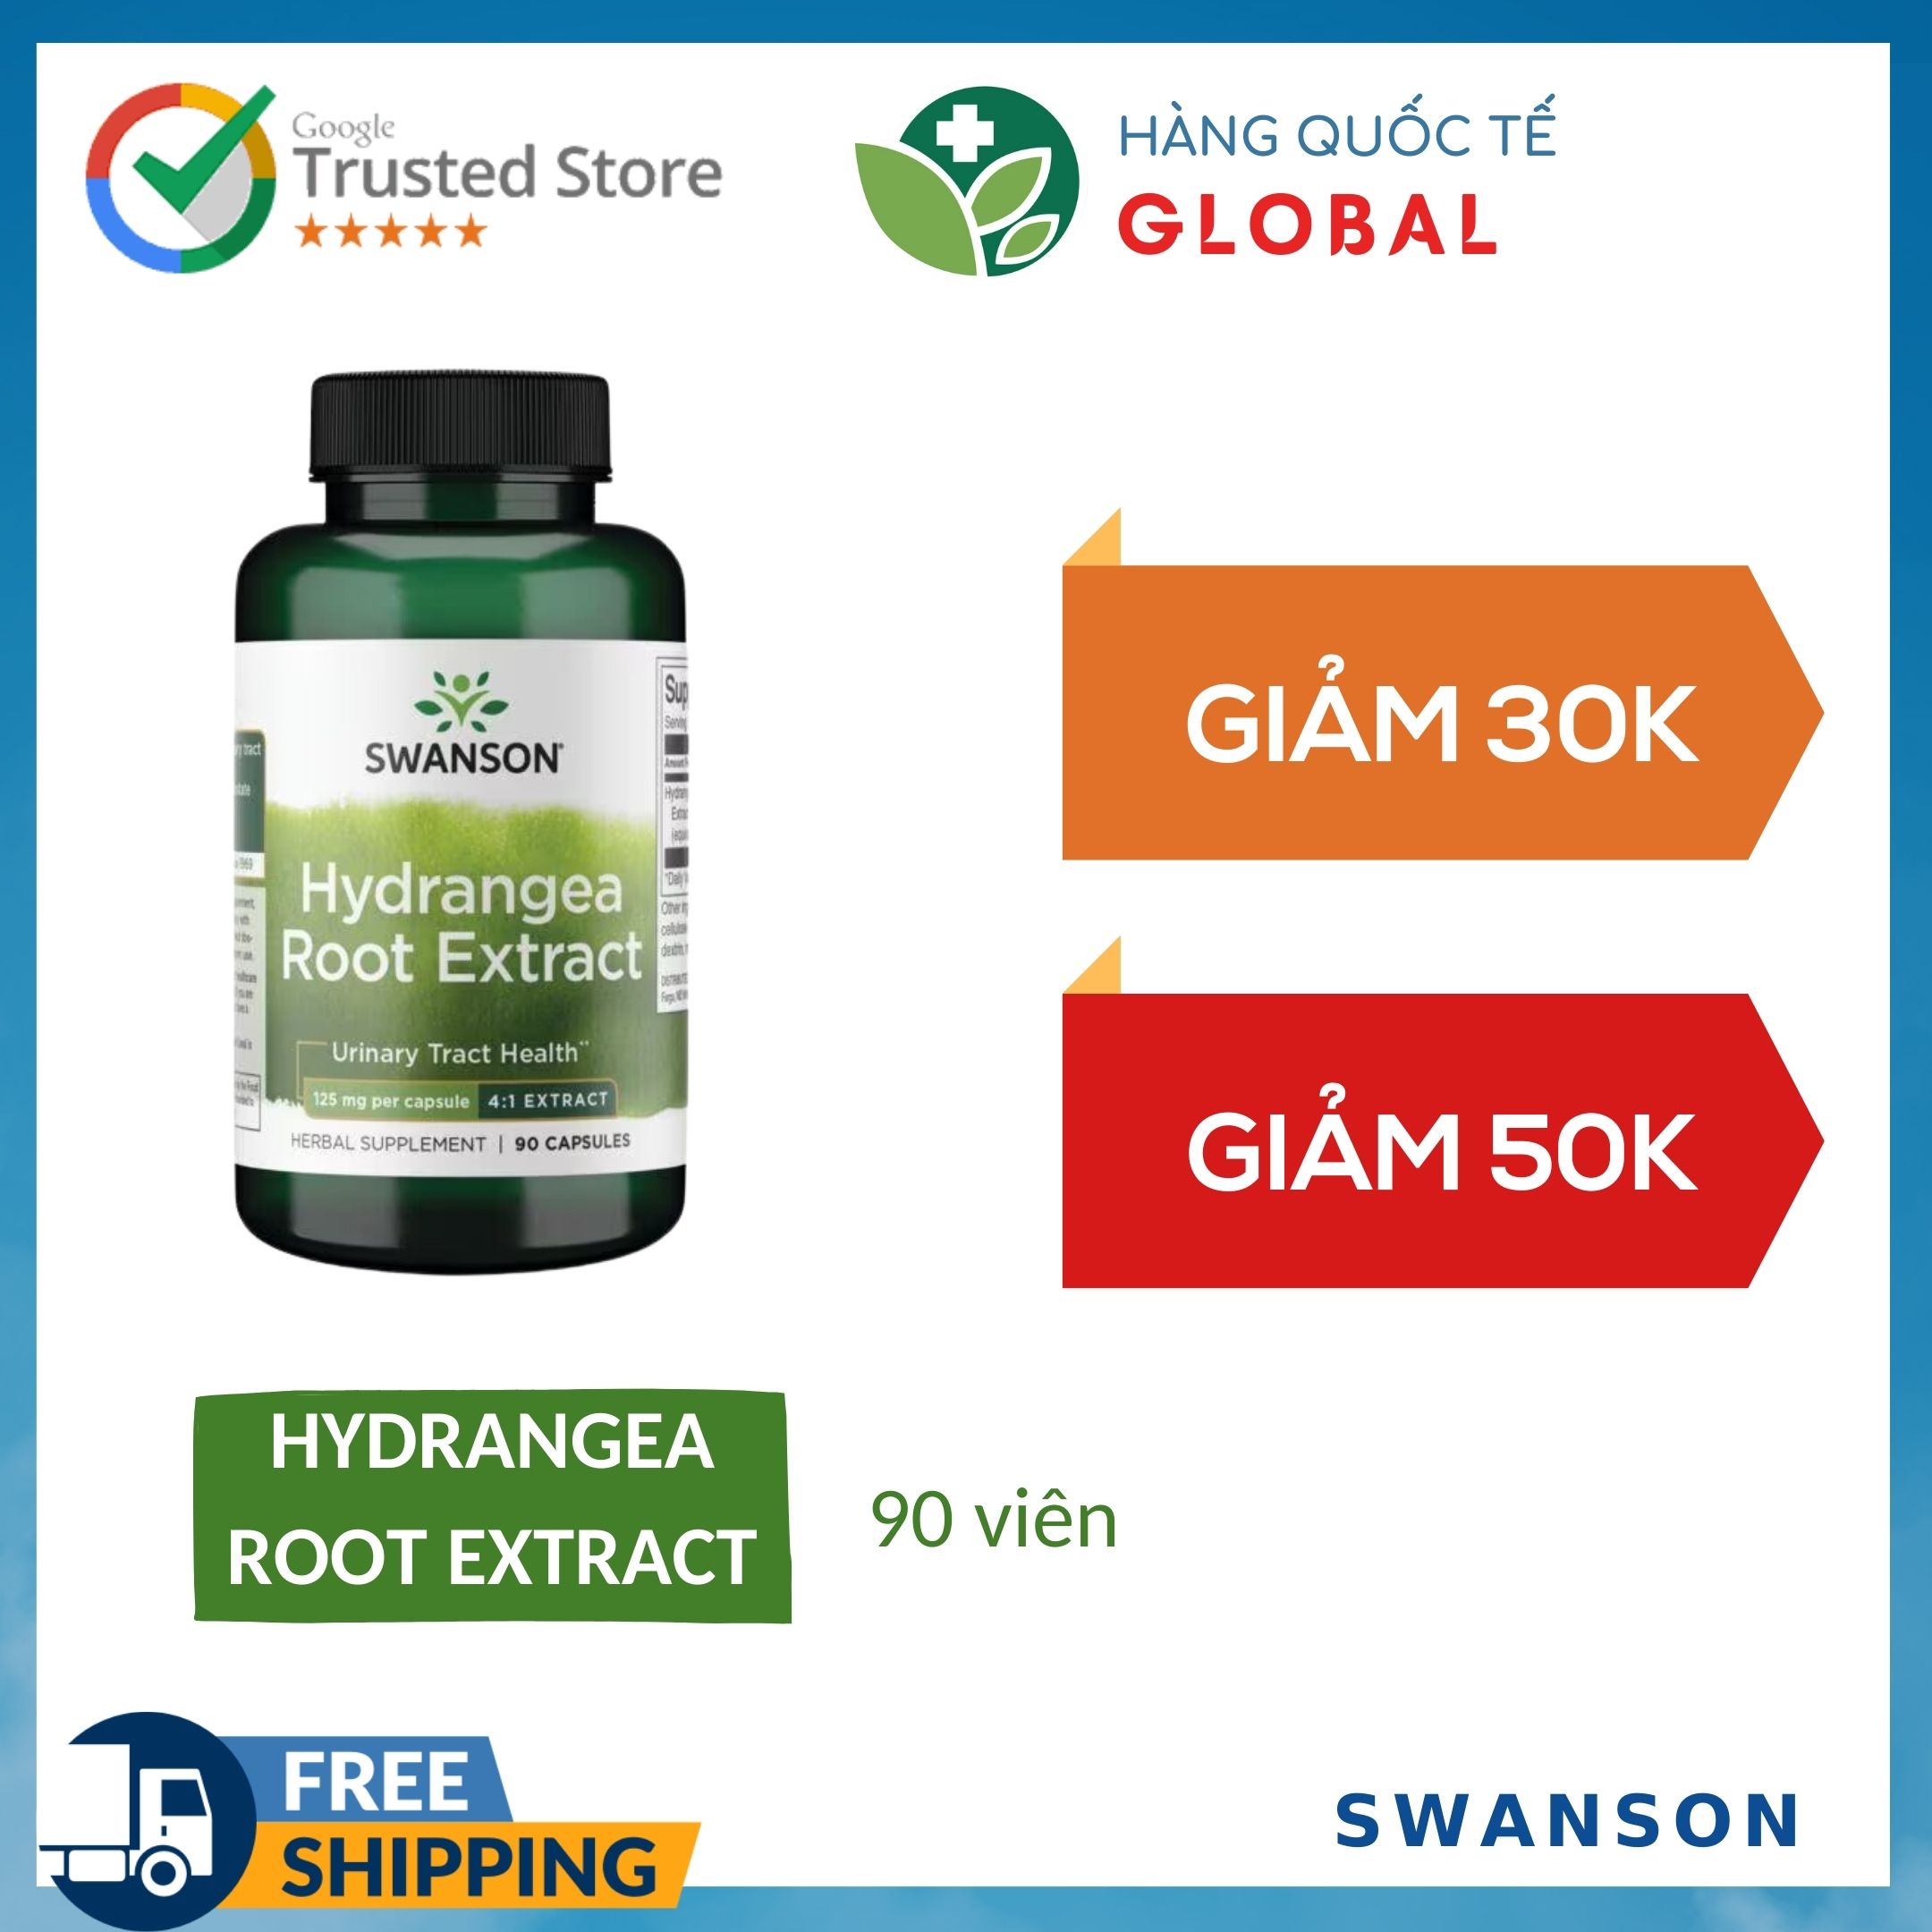 International Product SWANSON HYDRANGEA ROOT EXTRACT, 90 tablets, Prostate